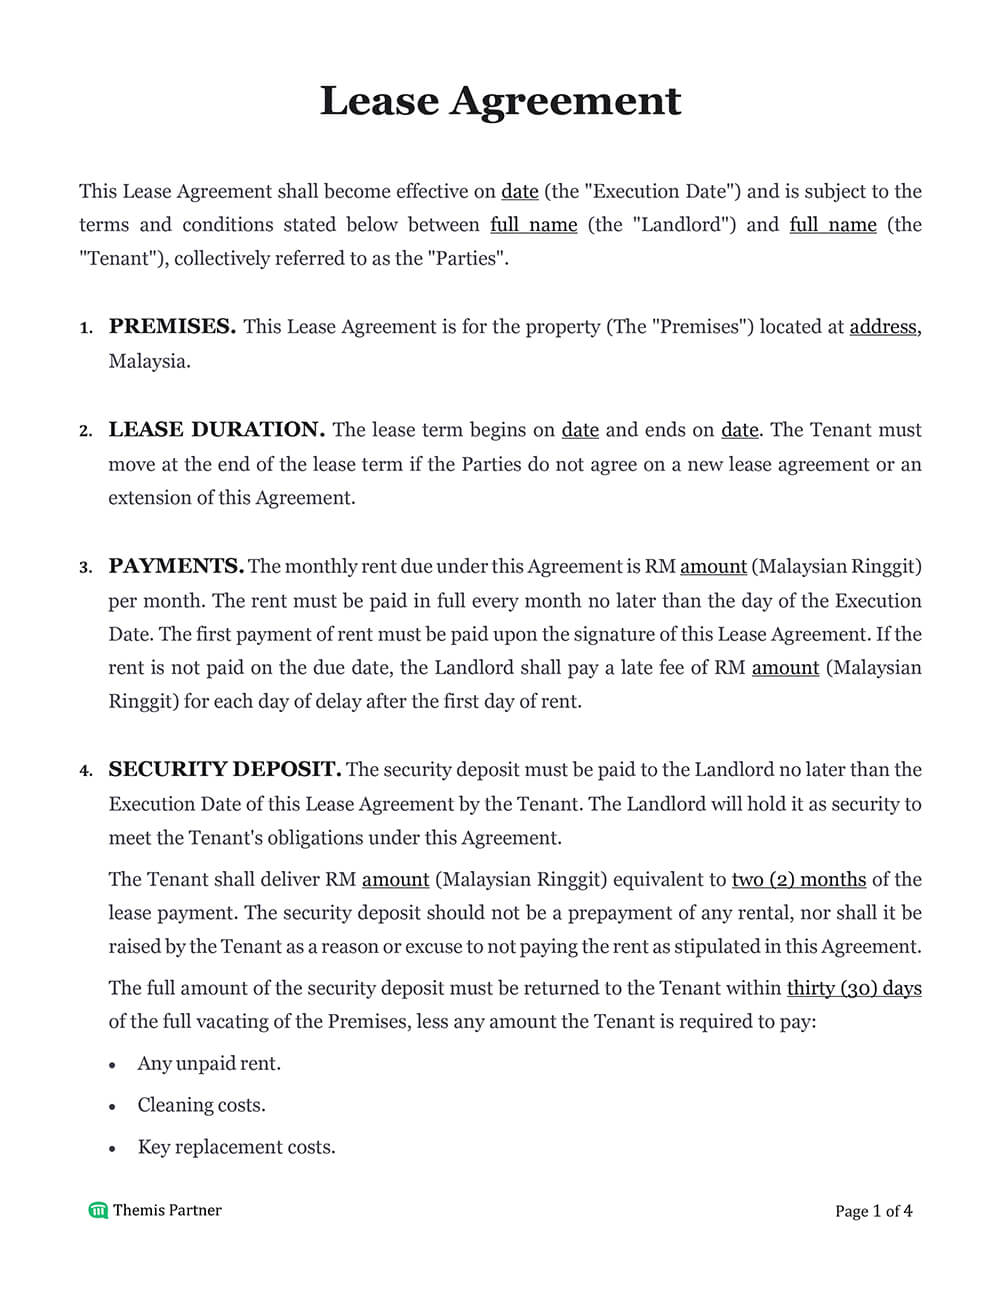 Lease agreement template